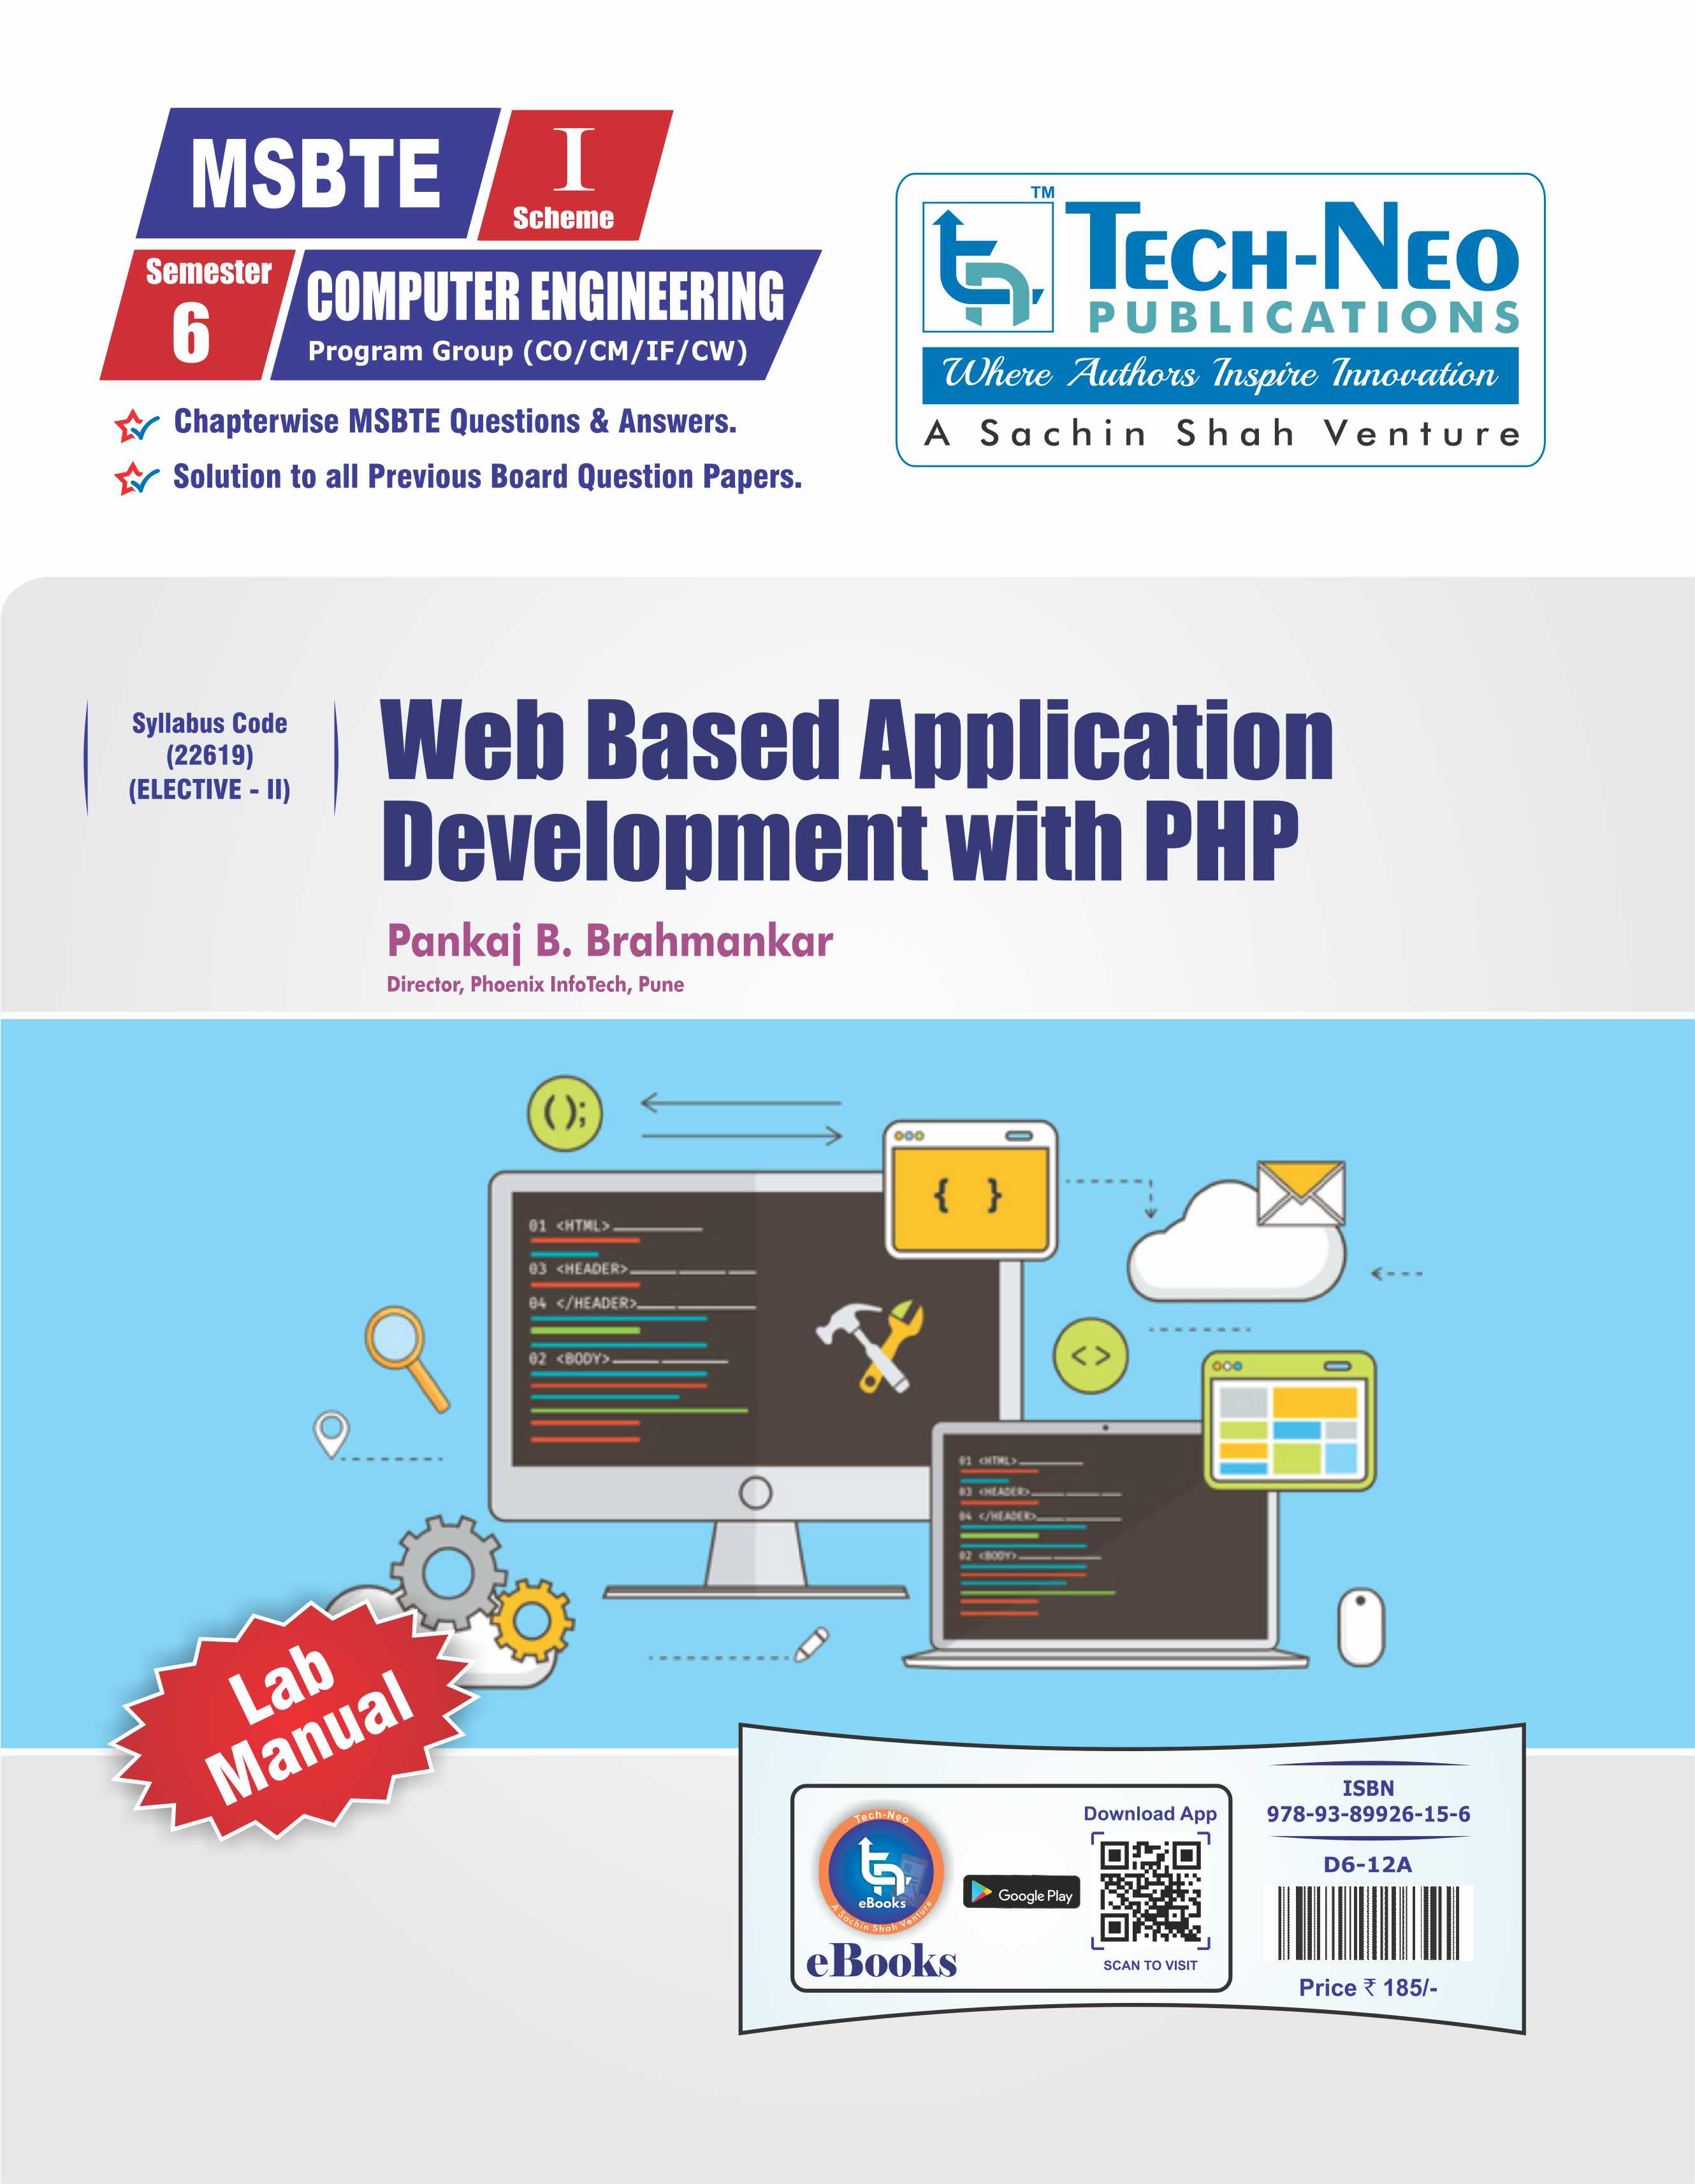 Web Based Applications Development With PHP